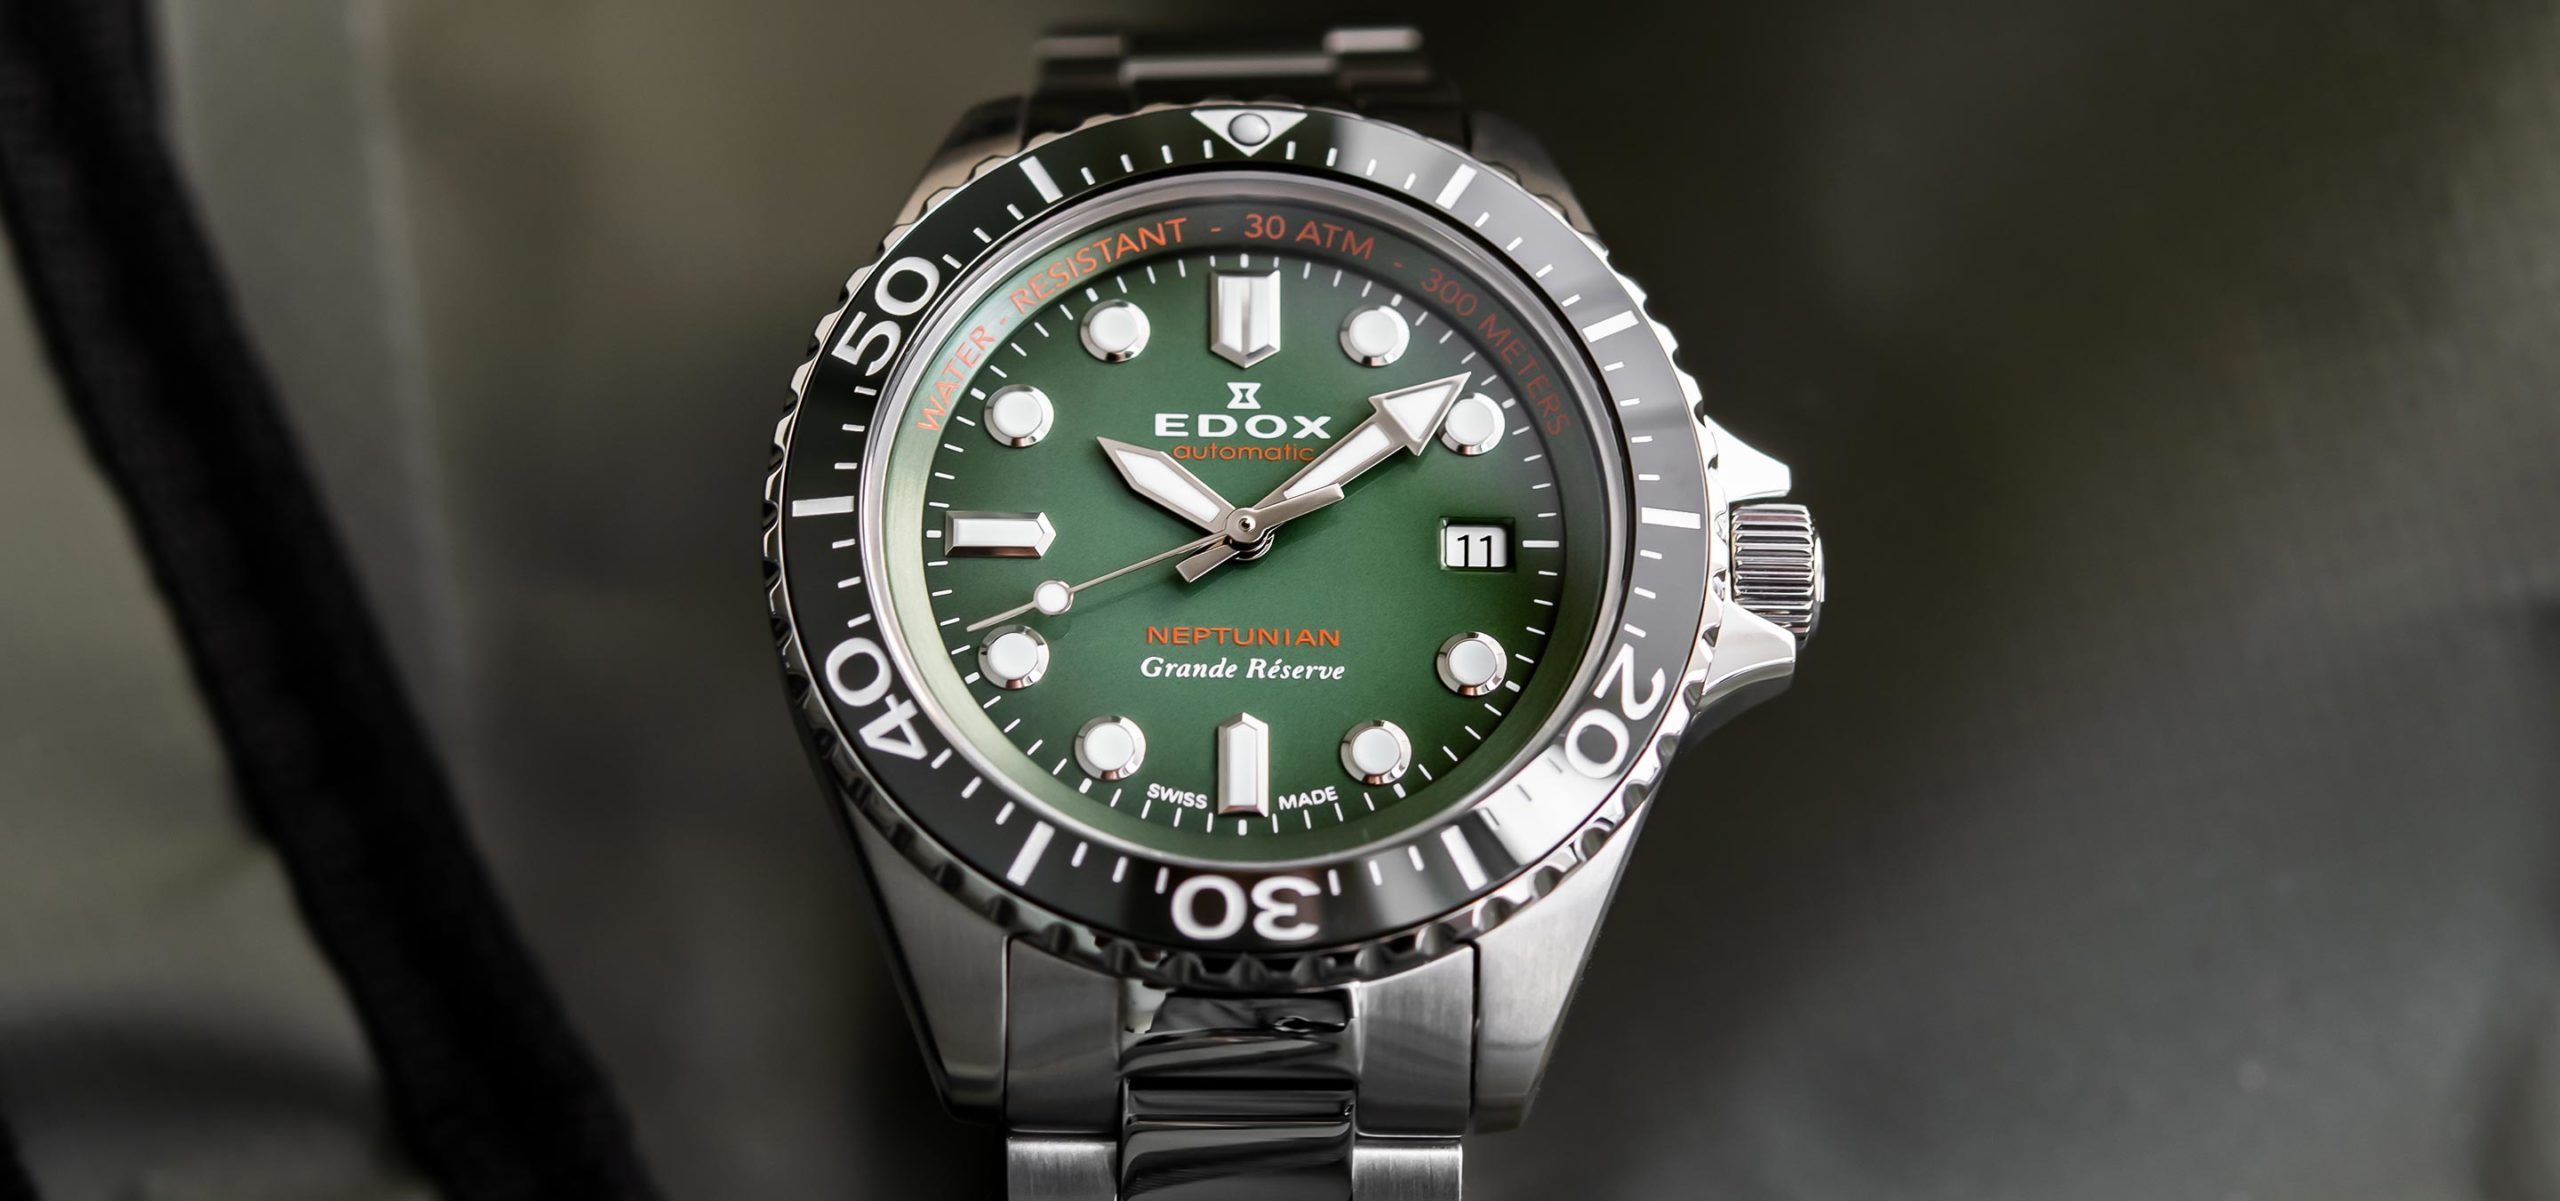 Lord Of The Sea: Presenting The Edox Neptunian Grande Réserve Dive Watch Series